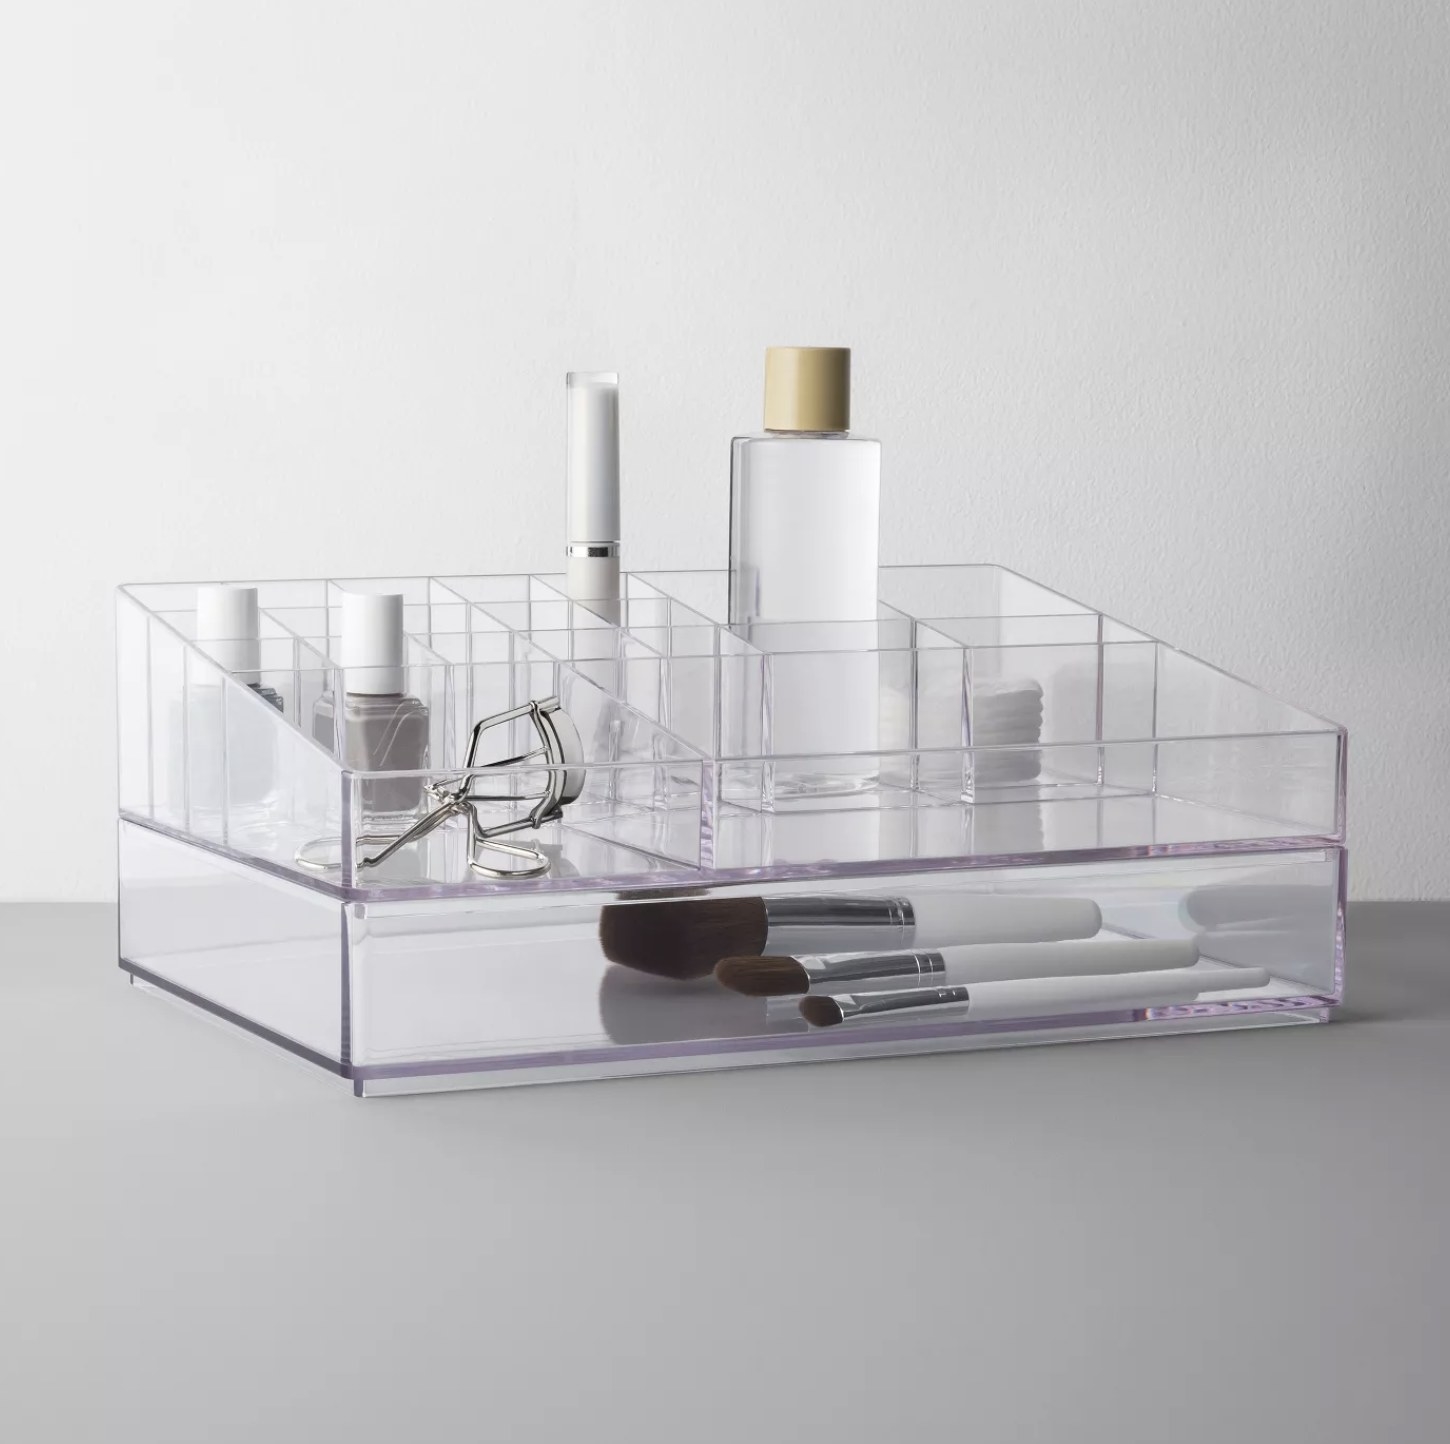 A clear cosmetics organizer holding nail polish, makeup brushes, a bottle of mascara, a few cotton pads, a lash curler, and a bottle filled with a clear solution